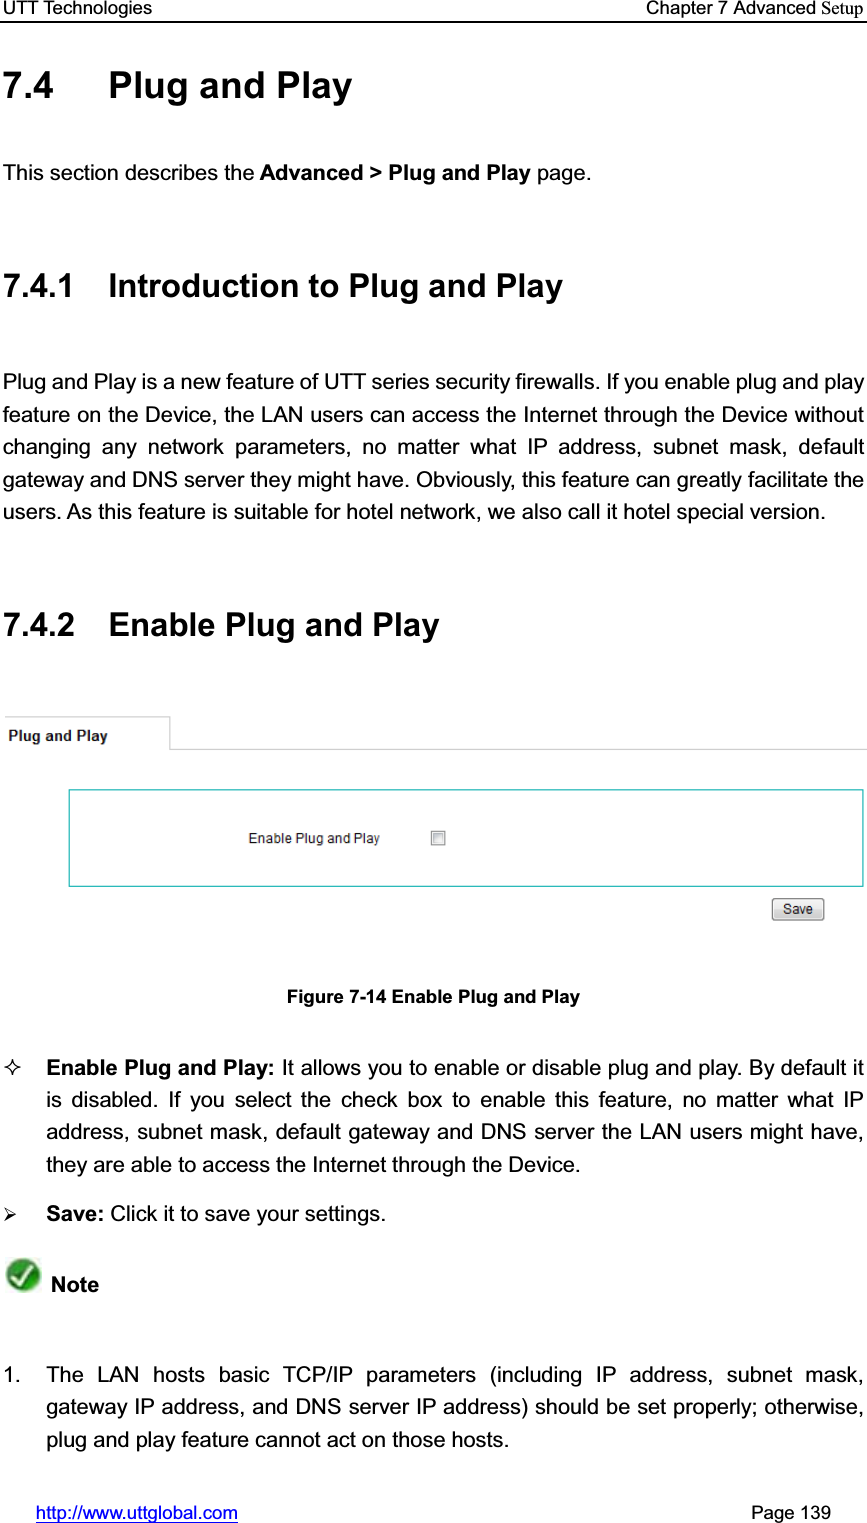 UTT Technologies    Chapter 7 Advanced Setuphttp://www.uttglobal.com                                                       Page 139 7.4  Plug and Play This section describes the Advanced &gt; Plug and Play page. 7.4.1  Introduction to Plug and Play Plug and Play is a new feature of UTT series security firewalls. If you enable plug and play feature on the Device, the LAN users can access the Internet through the Device without changing any network parameters, no matter what IP address, subnet mask, default gateway and DNS server they might have. Obviously, this feature can greatly facilitate the users. As this feature is suitable for hotel network, we also call it hotel special version. 7.4.2  Enable Plug and Play   Figure 7-14 Enable Plug and Play Enable Plug and Play: It allows you to enable or disable plug and play. By default it is disabled. If you select the check box to enable this feature, no matter what IP address, subnet mask, default gateway and DNS server the LAN users might have, they are able to access the Internet through the Device. ¾Save: Click it to save your settings.Note1.  The LAN hosts basic TCP/IP parameters (including IP address, subnet mask, gateway IP address, and DNS server IP address) should be set properly; otherwise, plug and play feature cannot act on those hosts. 